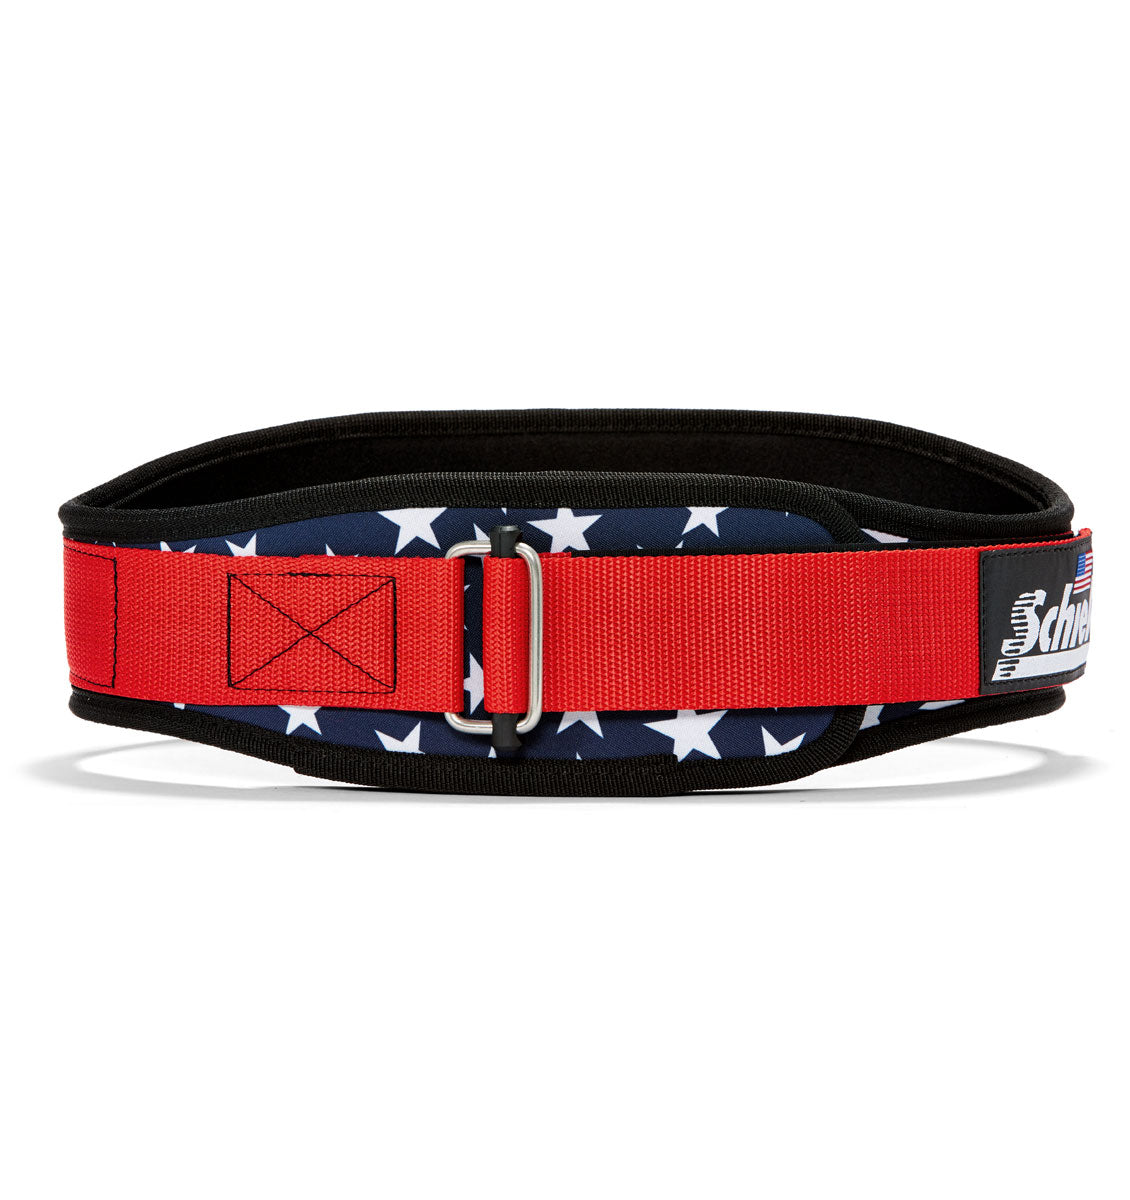 2004 Stars n Stripes Schiek Contour Weight Lifting Belt Stars and Stripes Front